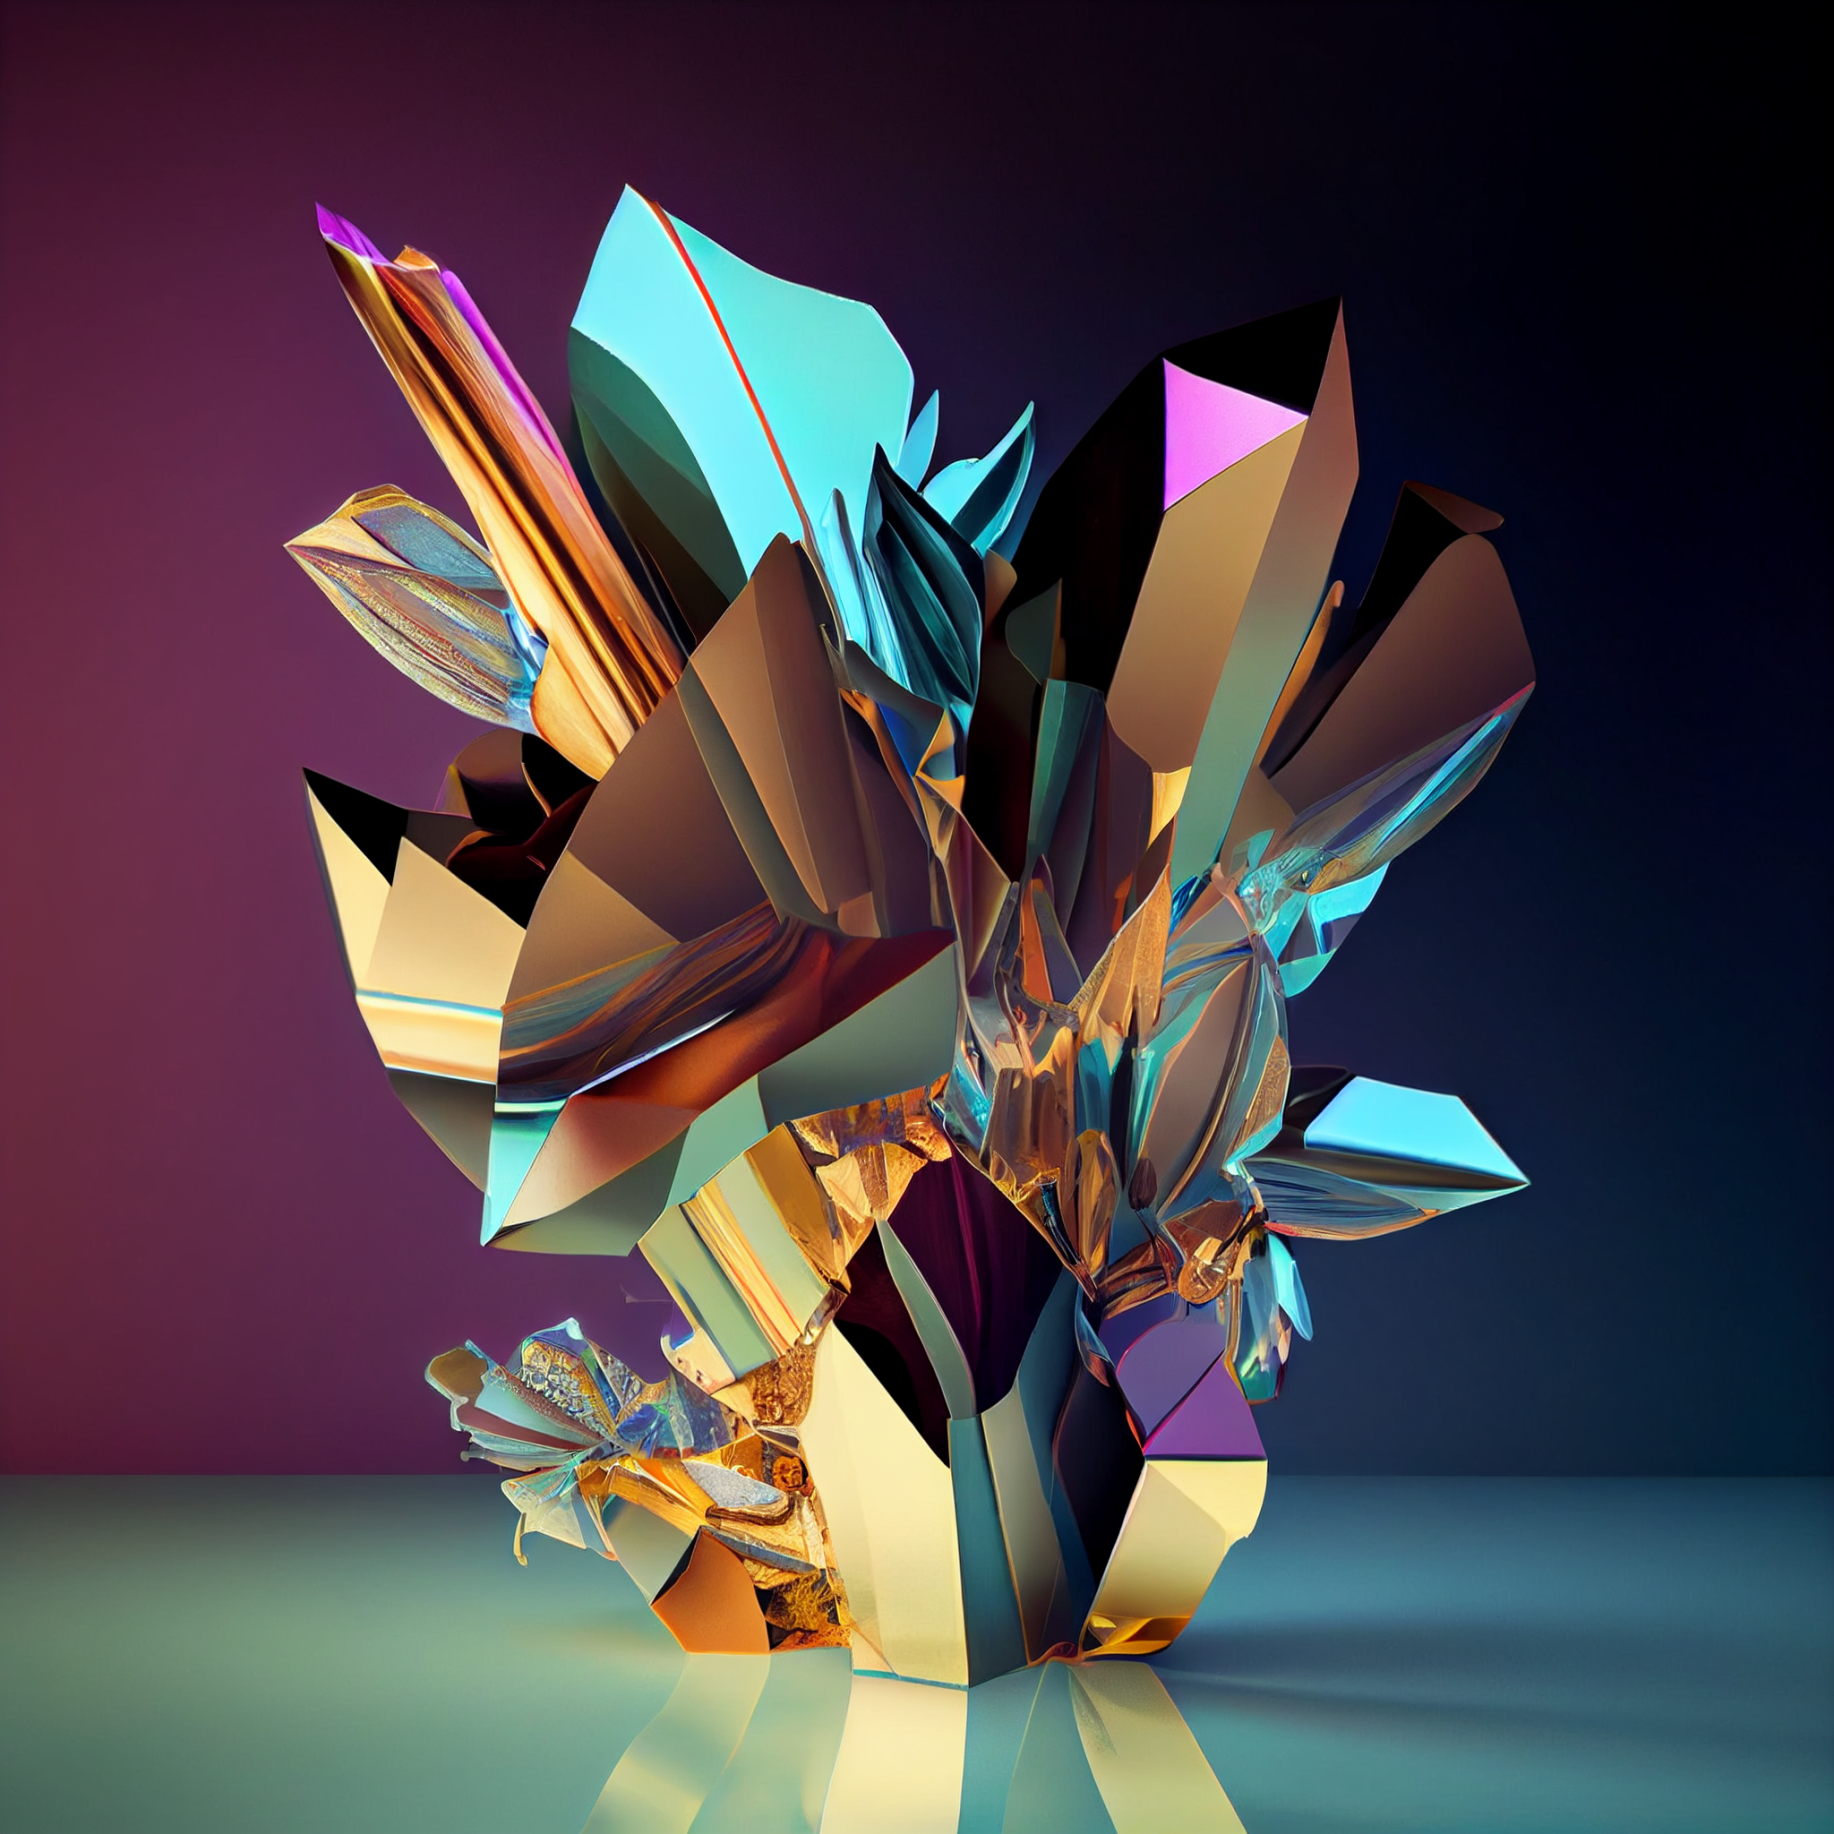 aaronalden_alien_crystal_flowers_angular_jagged_fragmented_stud_9ae75e03-0990-4858-a91b-7d4943fcecf1.png